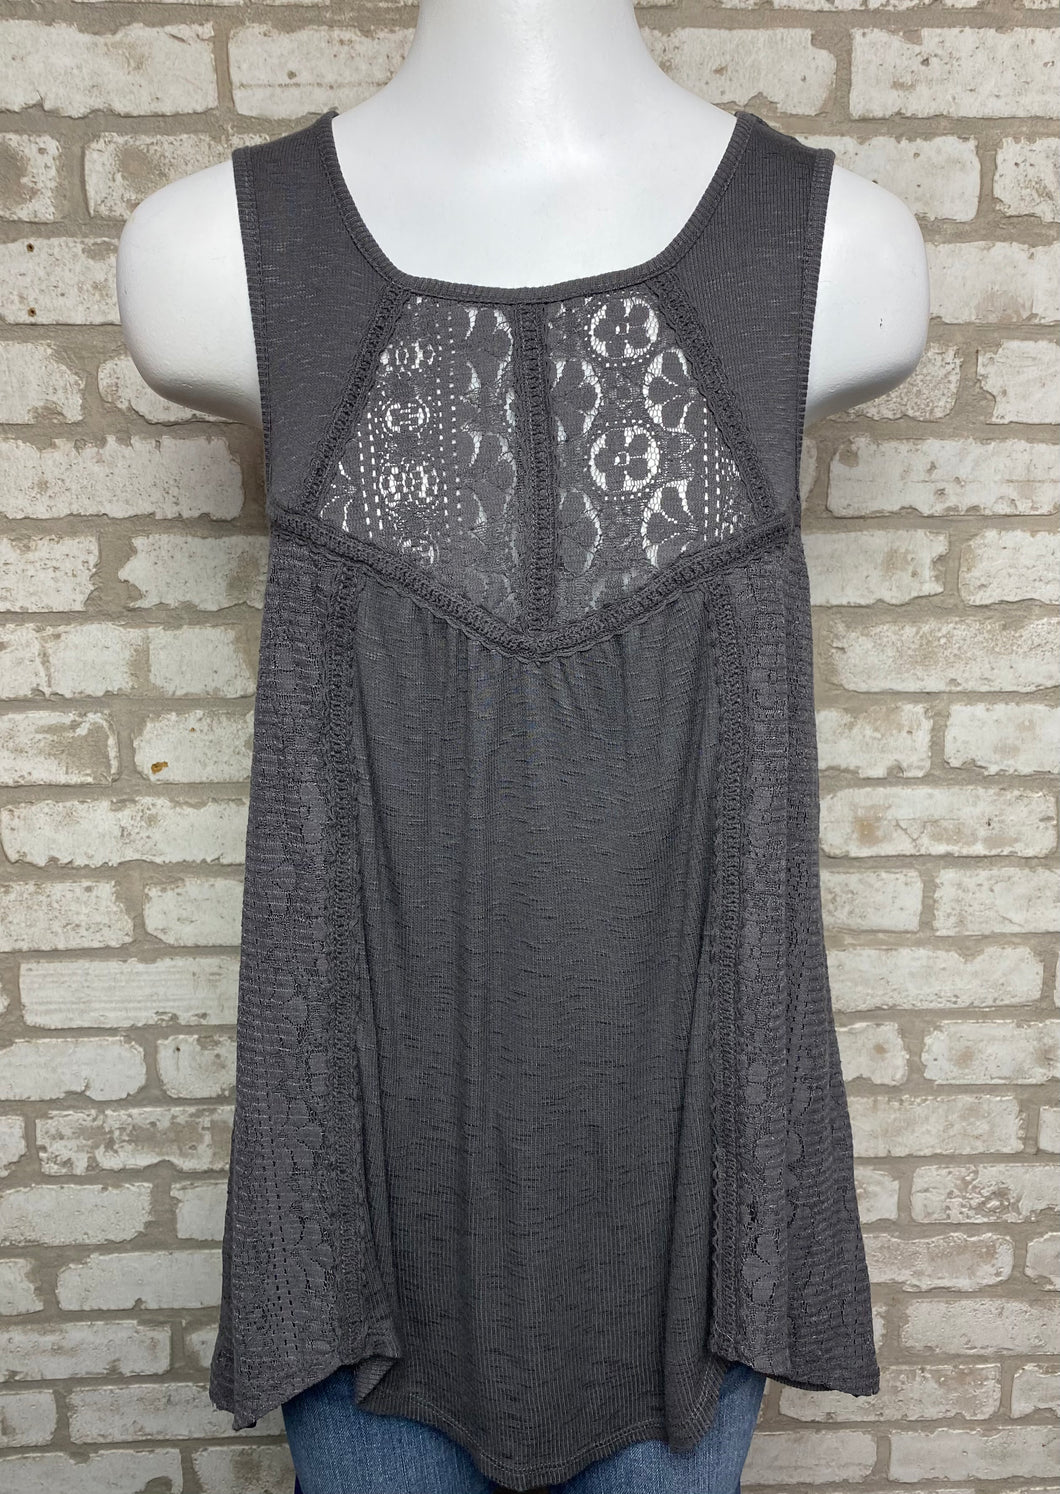 Maurices Tank NEW!- (M)